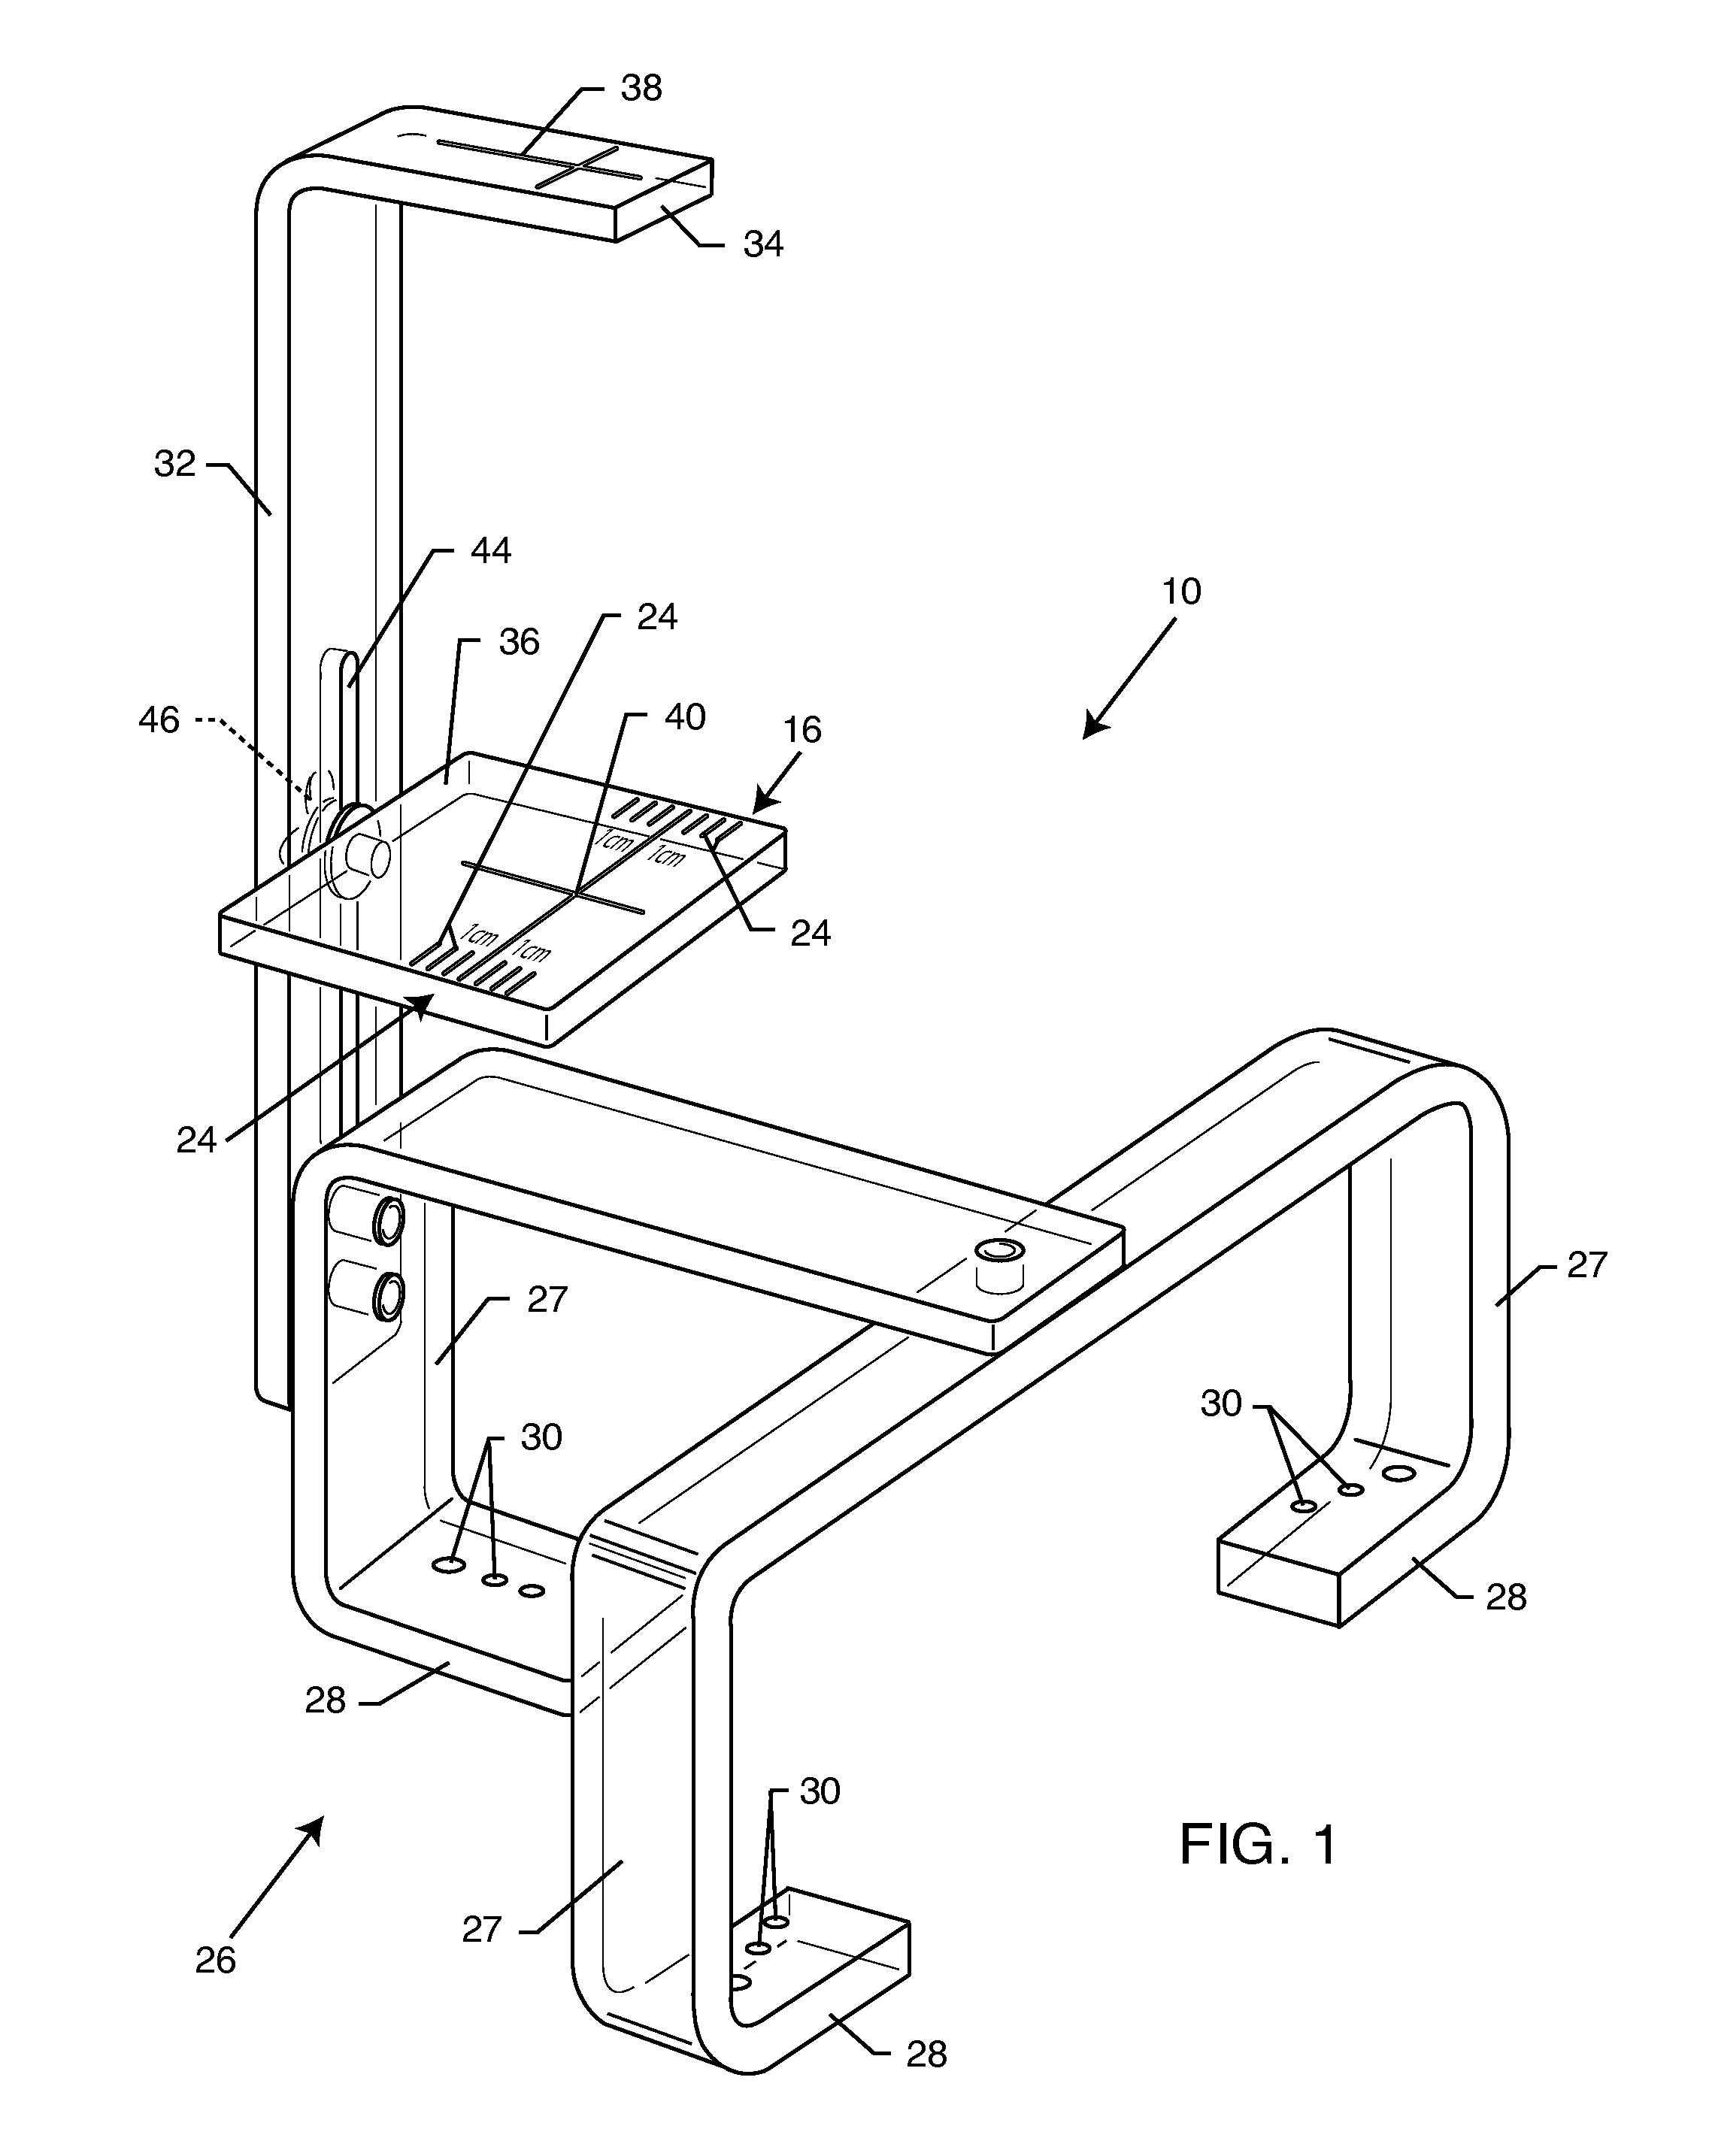 Alignment fixture for x-ray images